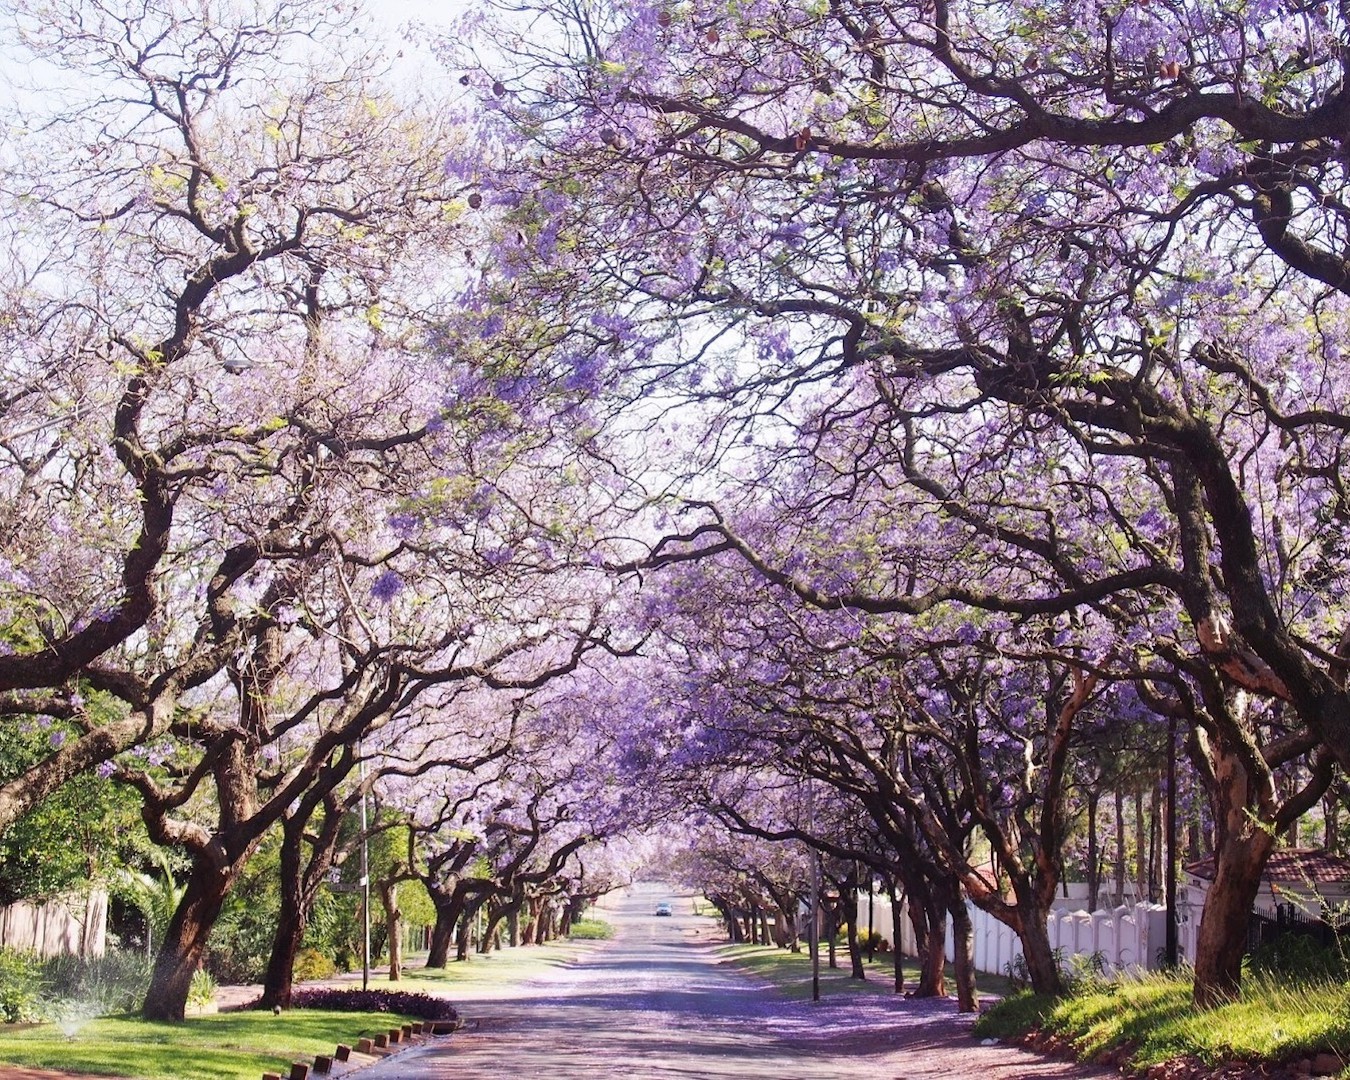 A street lined with purple-hued jacaranda trees in Perth